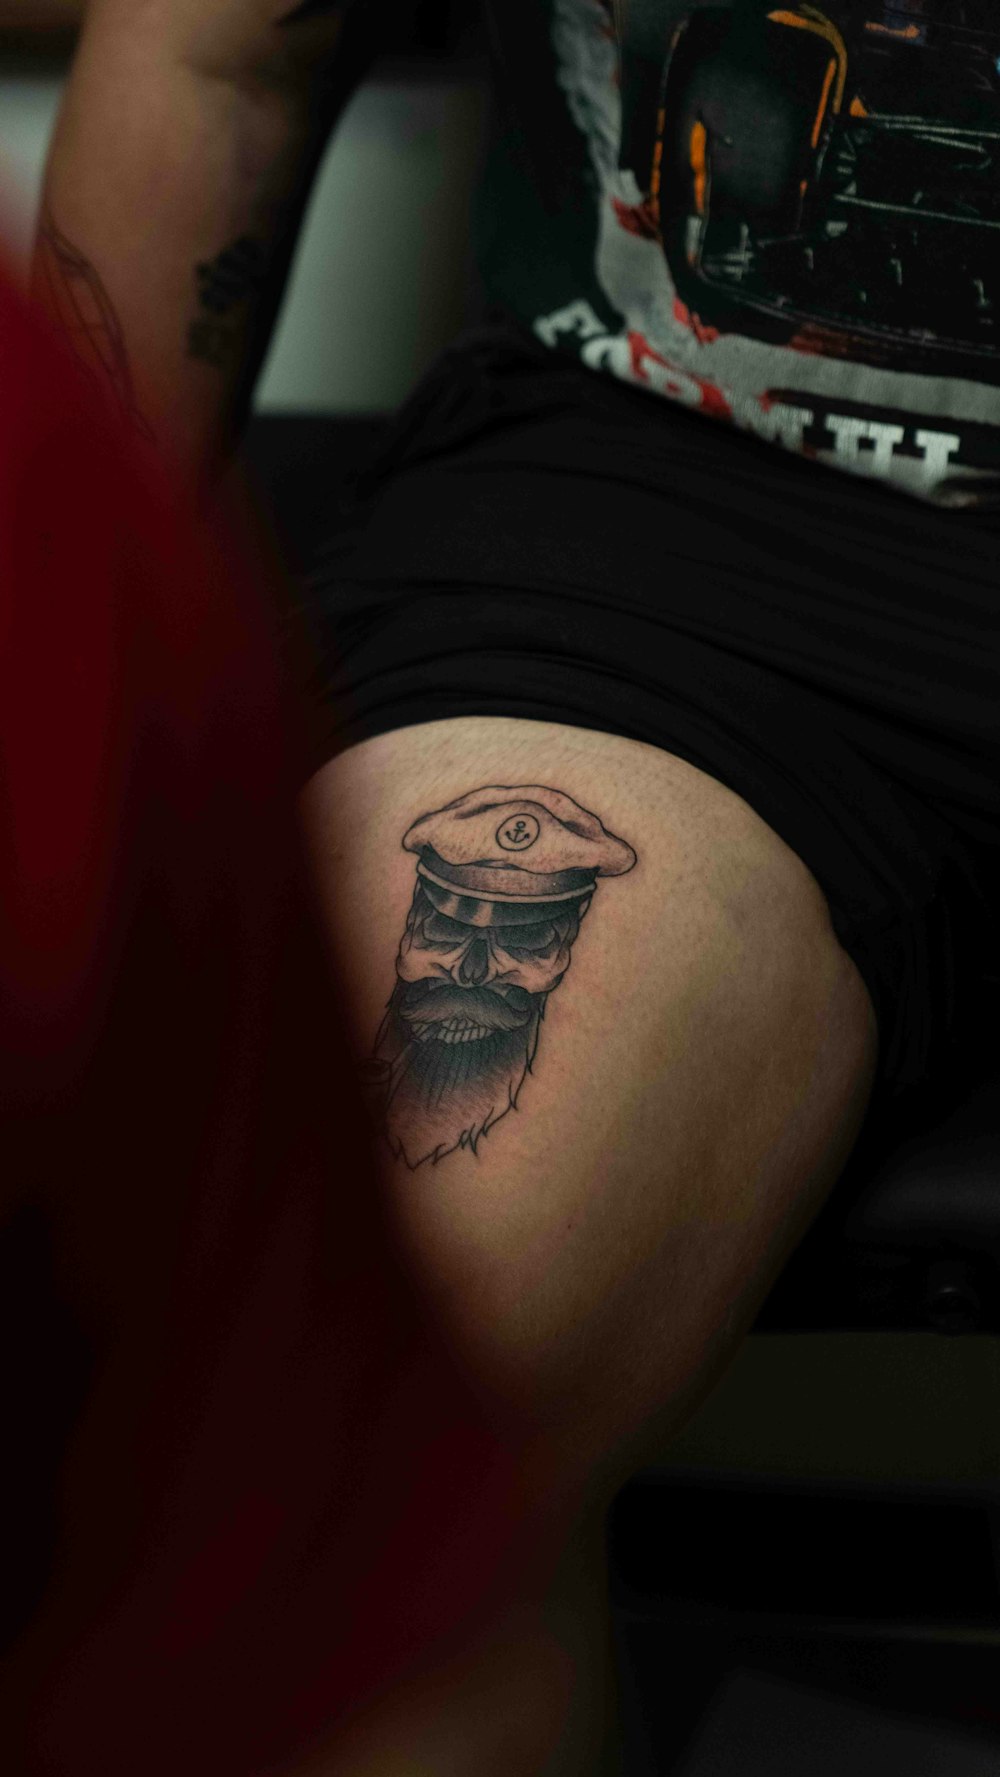 a man with a tattoo on his leg